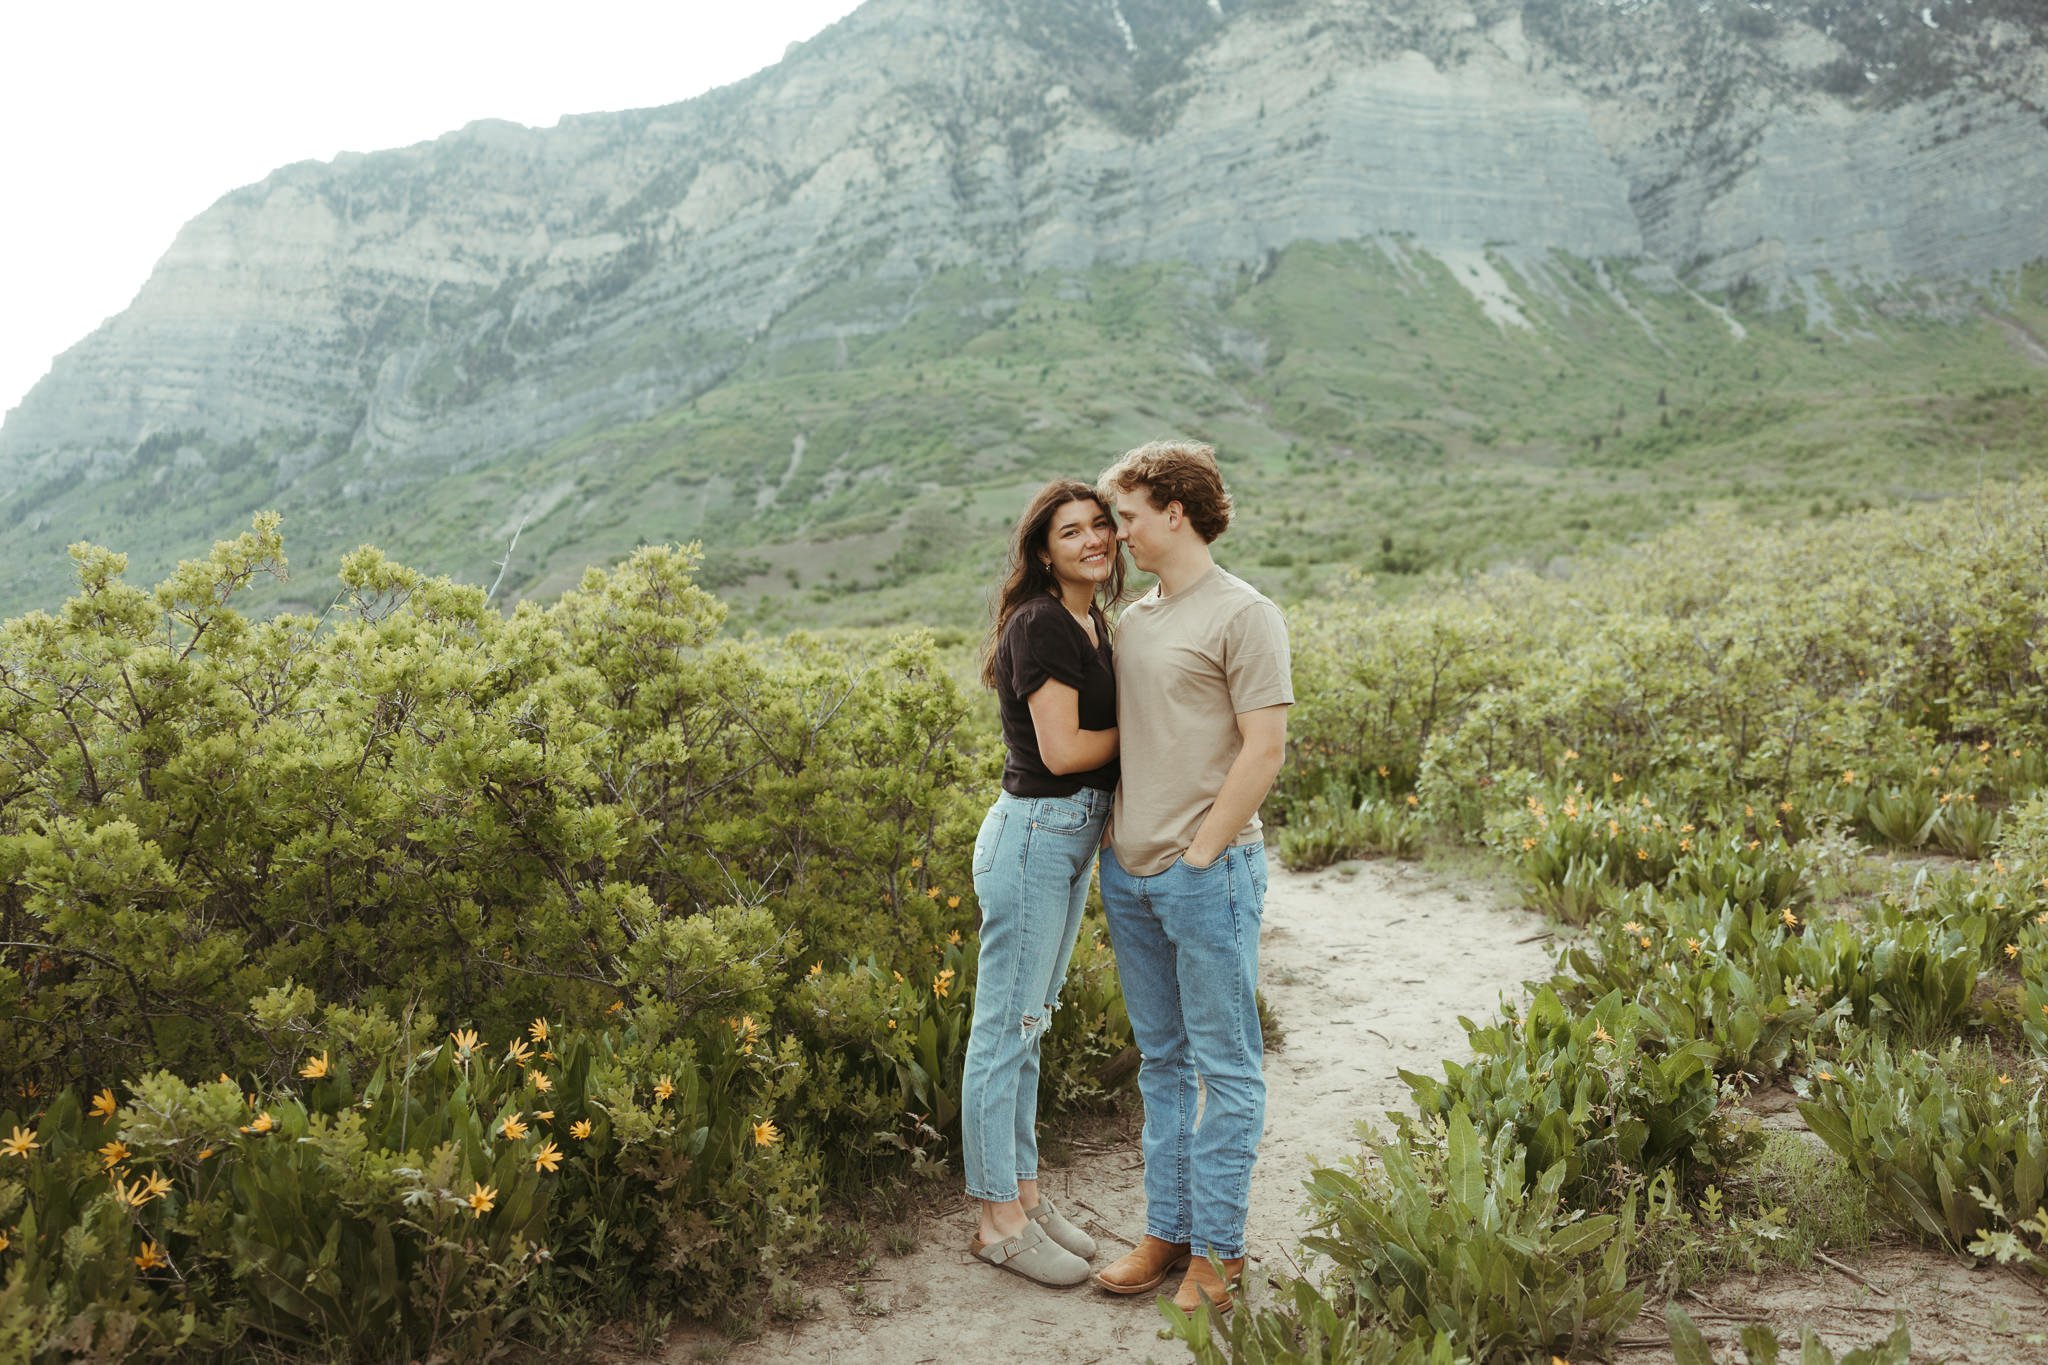 Spring-Provo-Canyon-Wildflowers-Engagement-Session-29